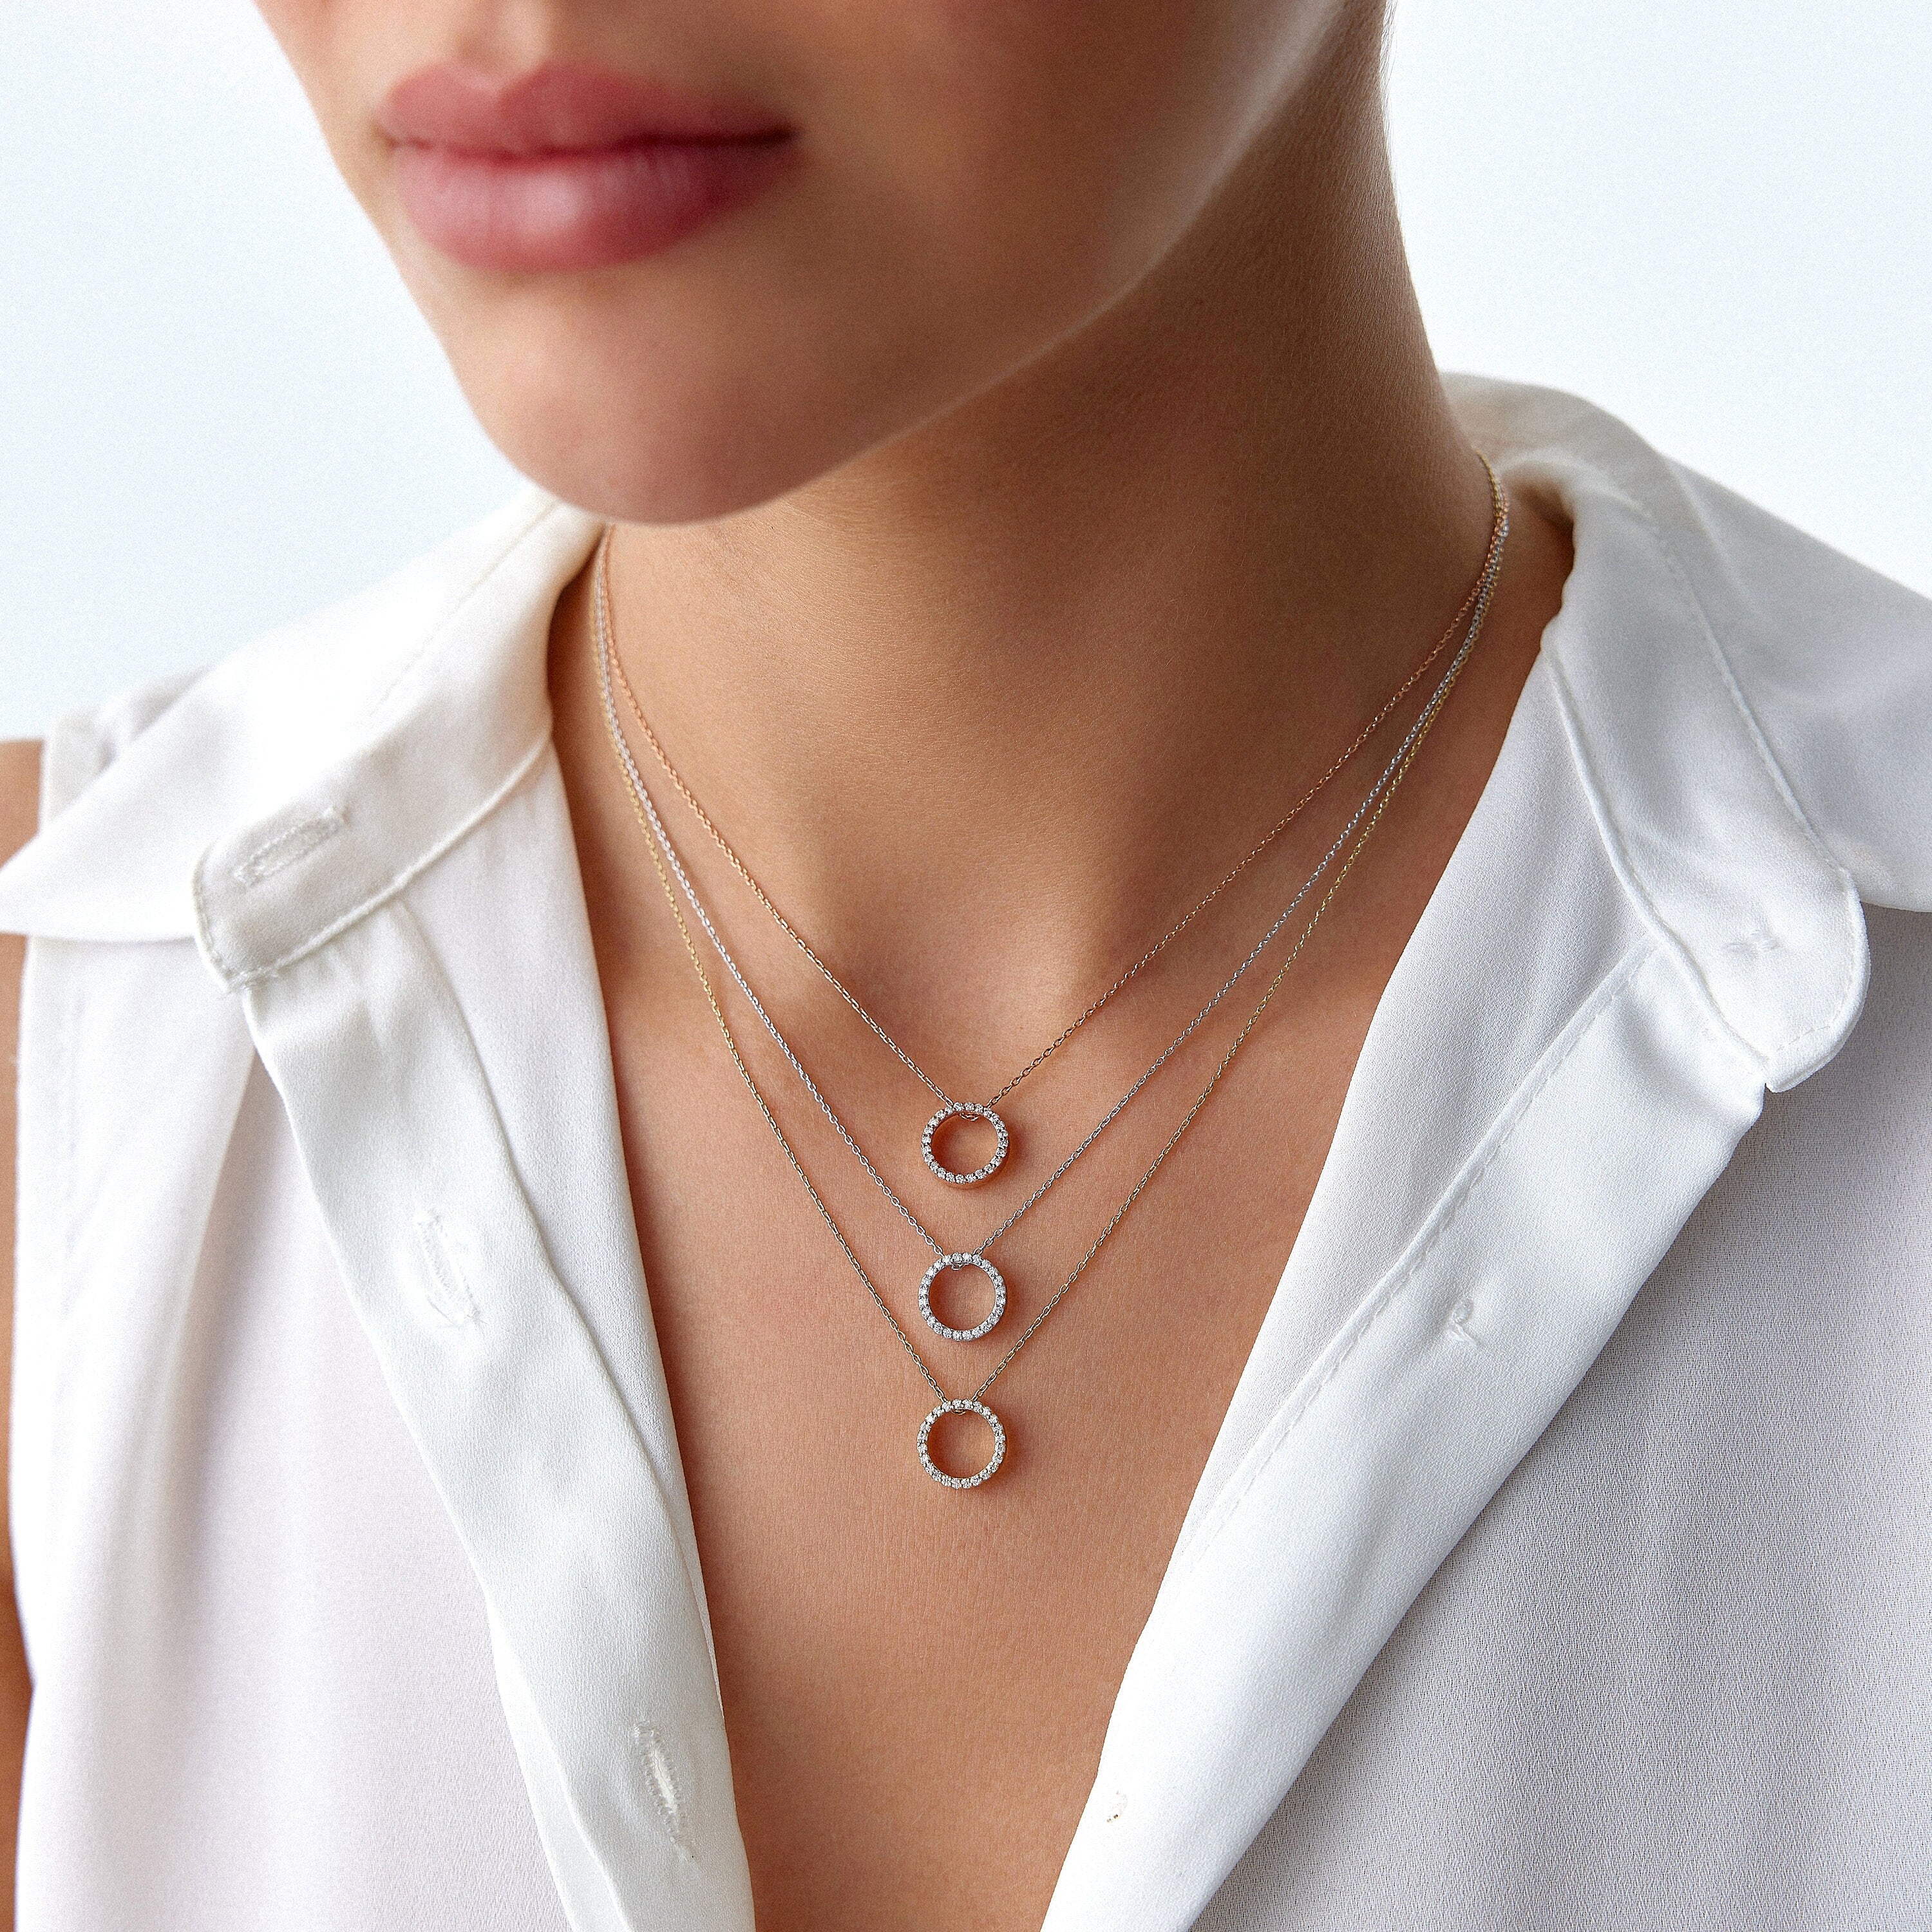 Open Diamond Circle Necklace Available in 14K and 18K Gold